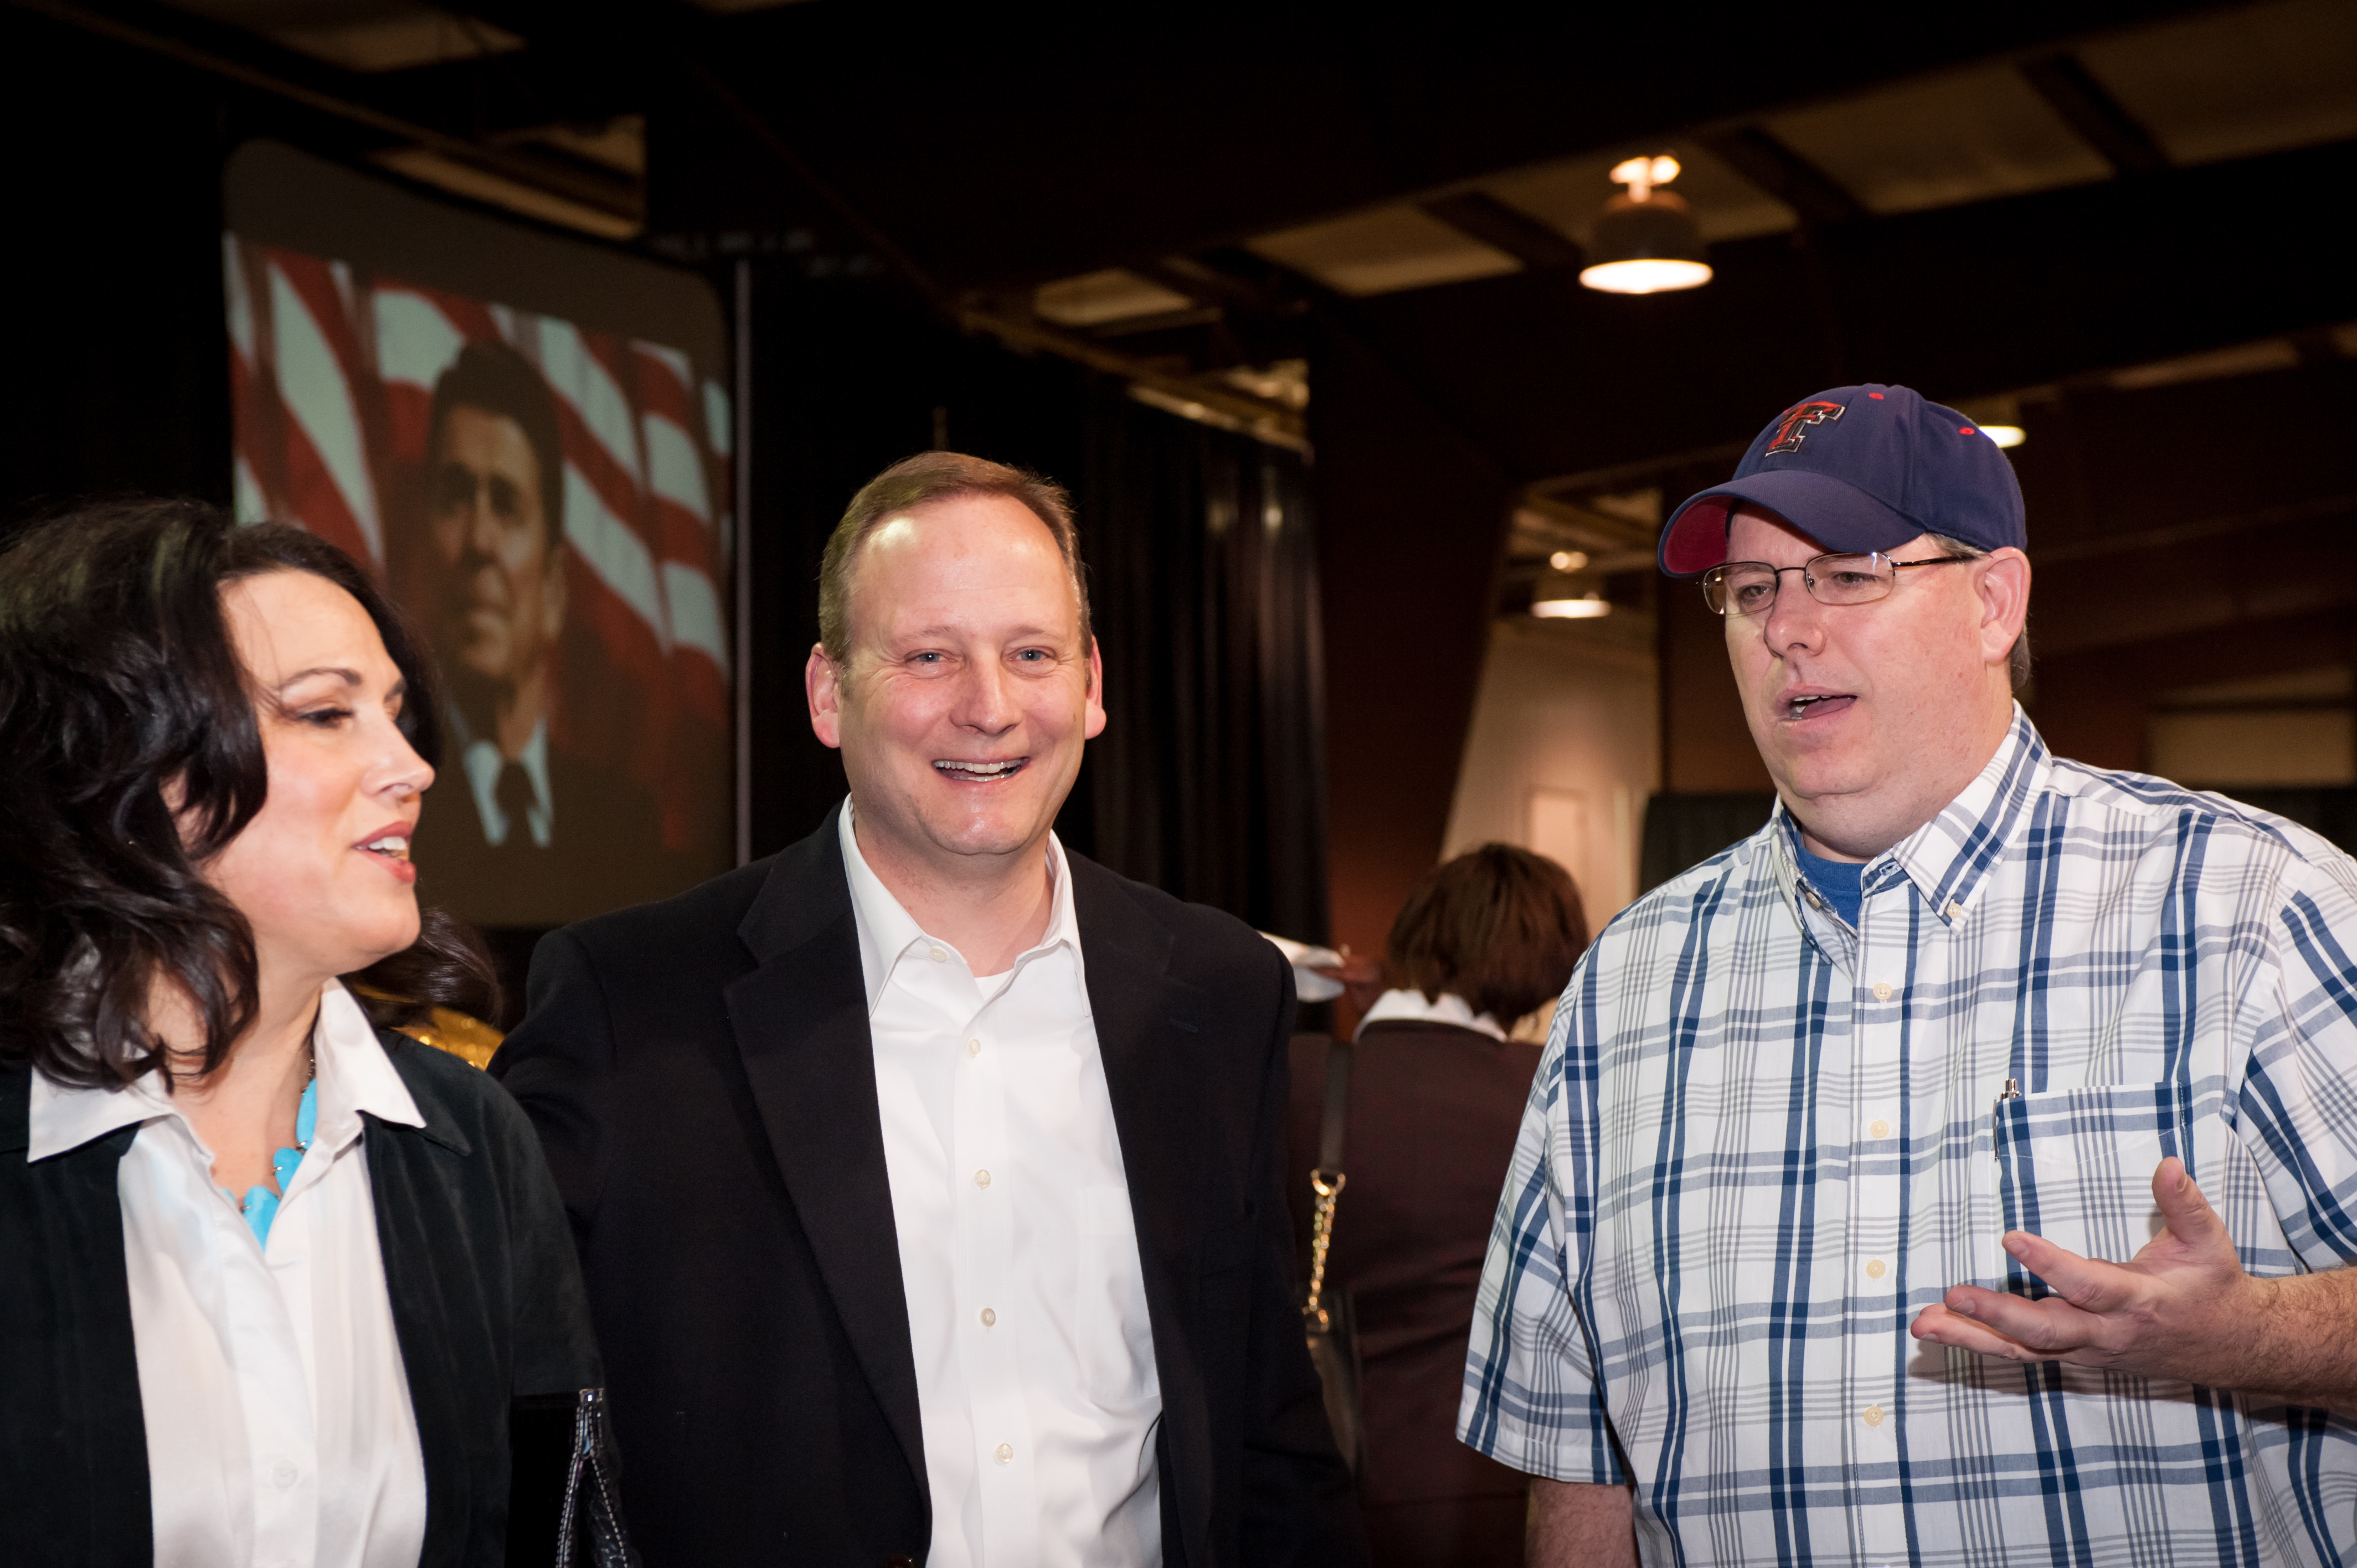 Shaie Williams for AGN Media. Mr. and Mrs Four Price with Danny Butcher at the Texas Panhandle Lincoln-Reagan Day Dinner hosted by the local Republican party groups held at The Rex Baxter Building in Amarillo, TX on January 29, 2016